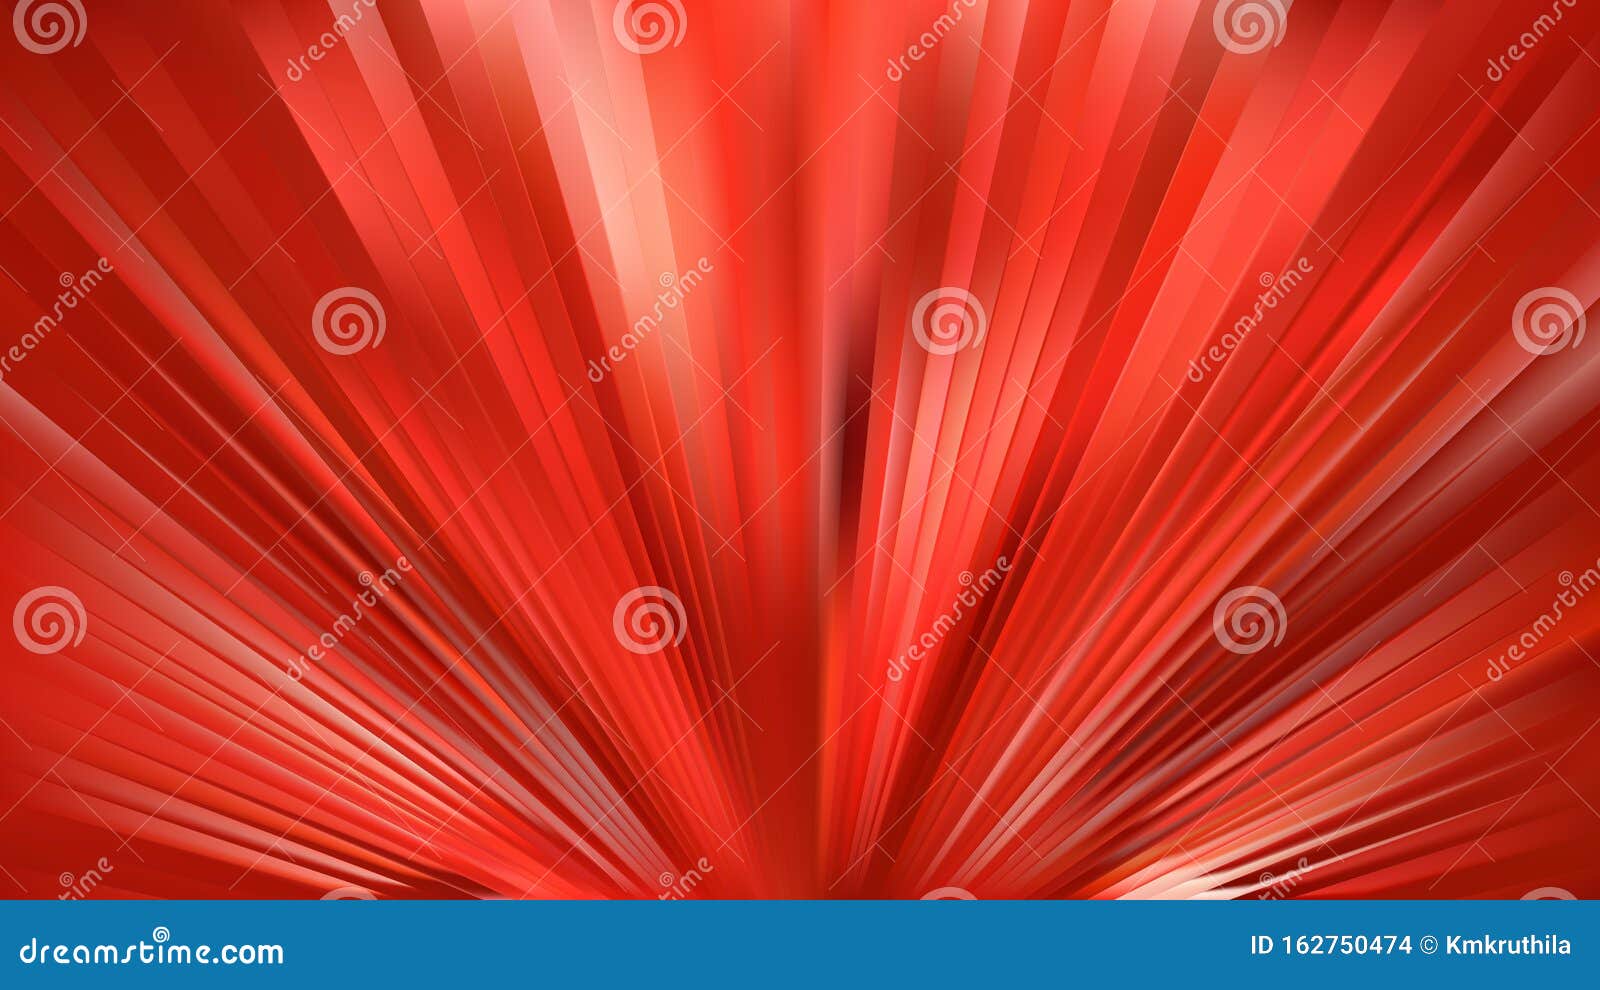 Red Rays Background Stock Illustrations – 31,356 Red Rays Background Stock  Illustrations, Vectors & Clipart - Dreamstime